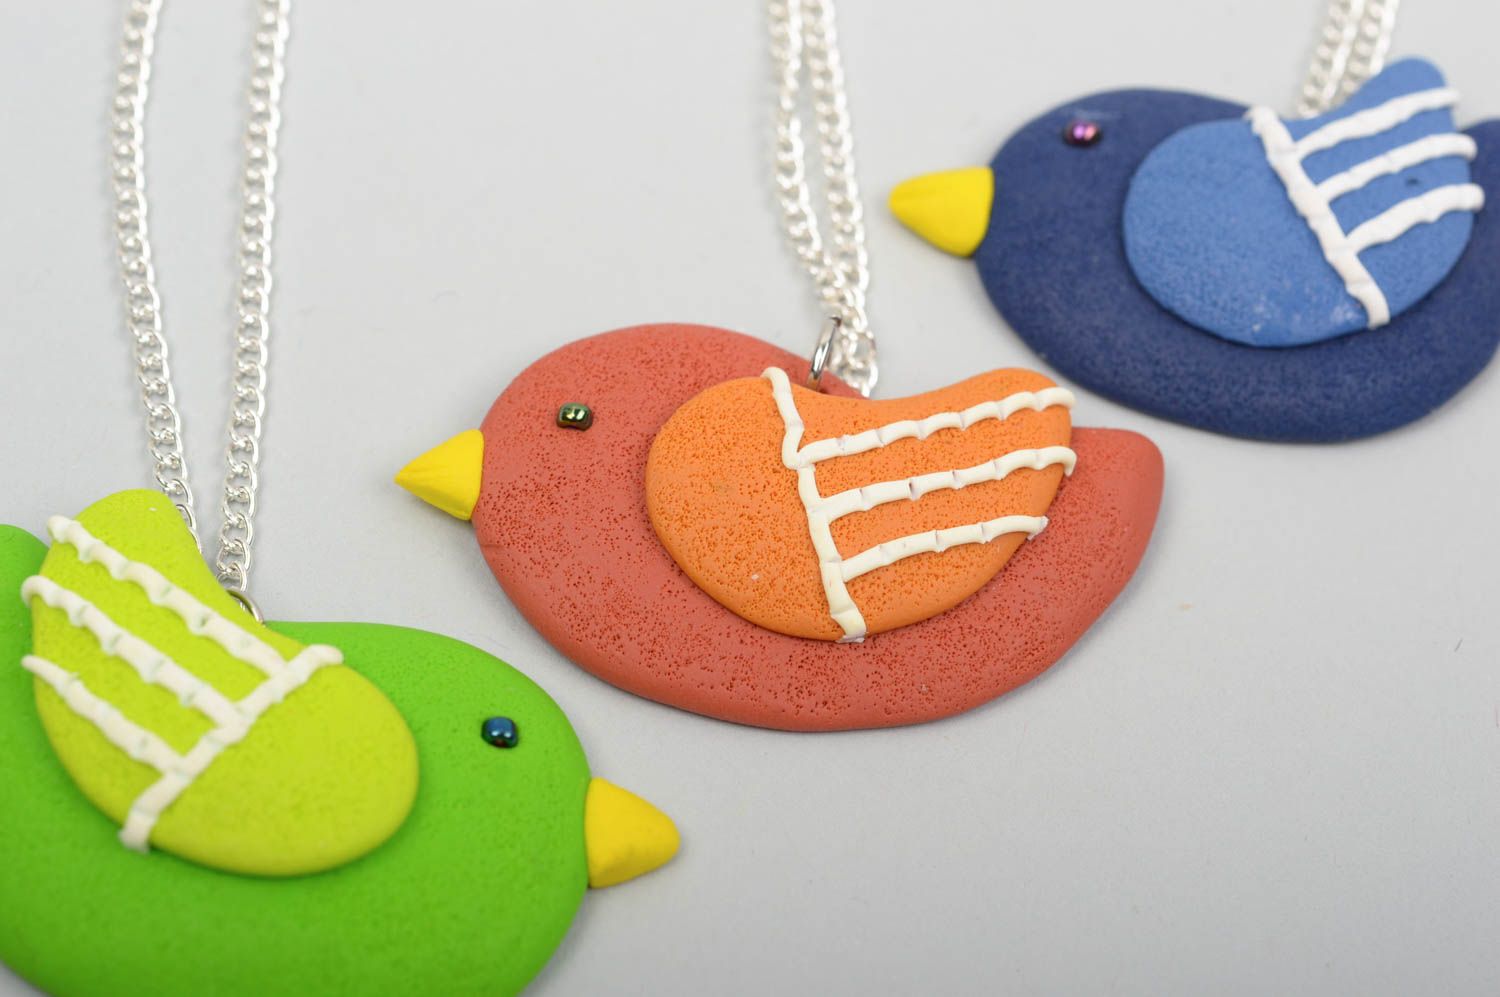 Fashion necklace handmade jewelry set polymer clay pendant necklaces kids gifts photo 4